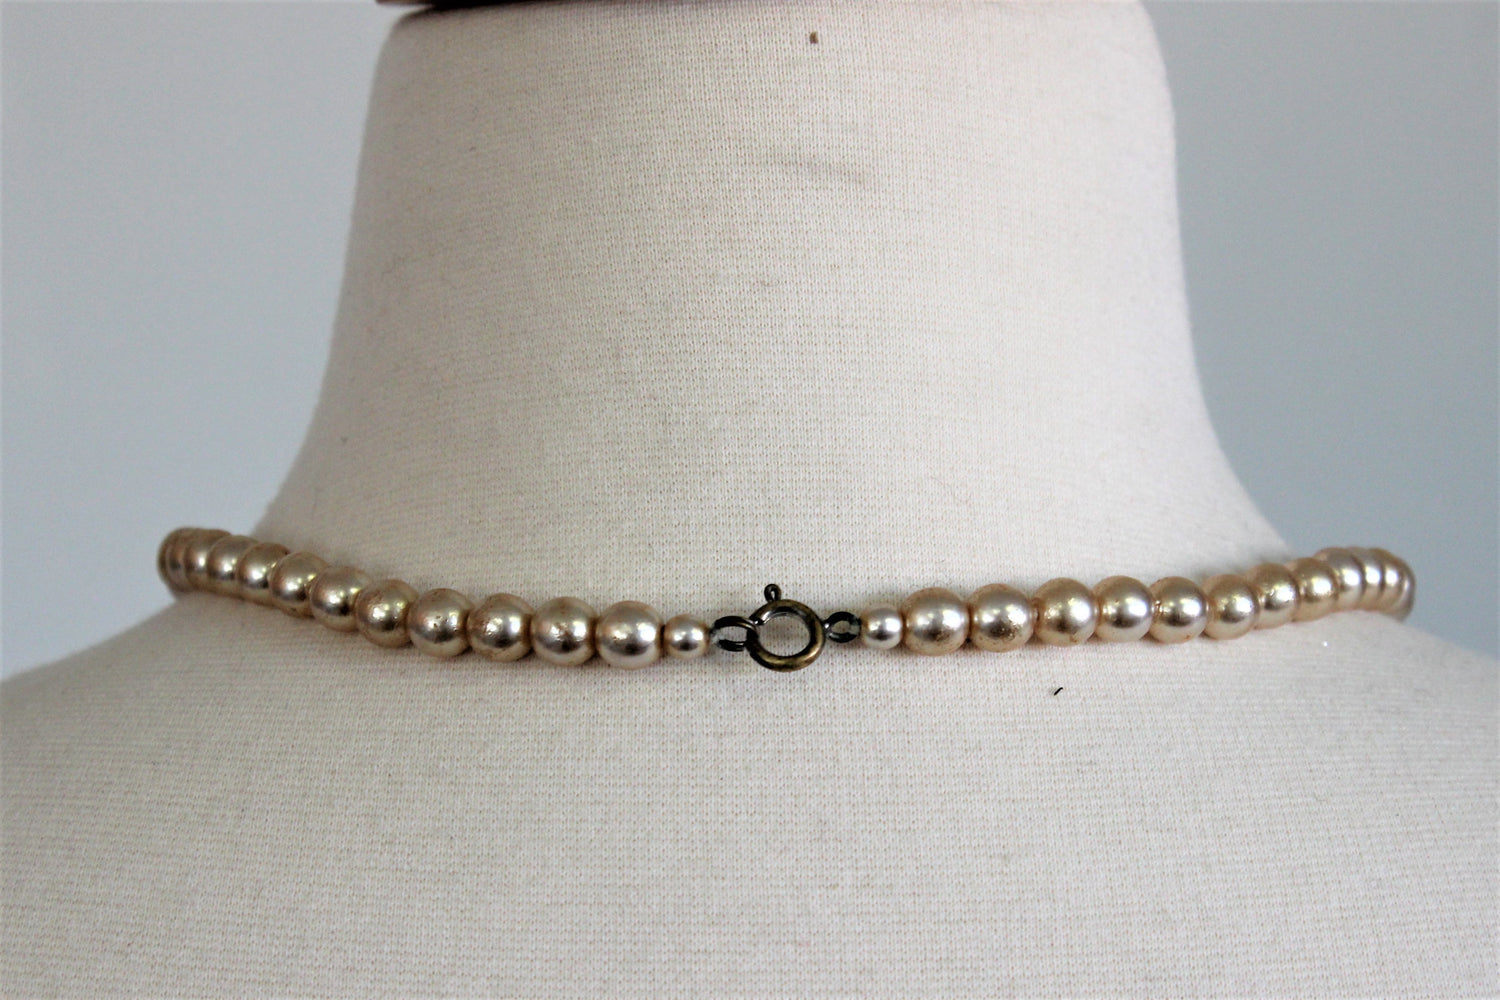 Vintage 1960s Faux Pearl Choker Necklace 18 Inch 